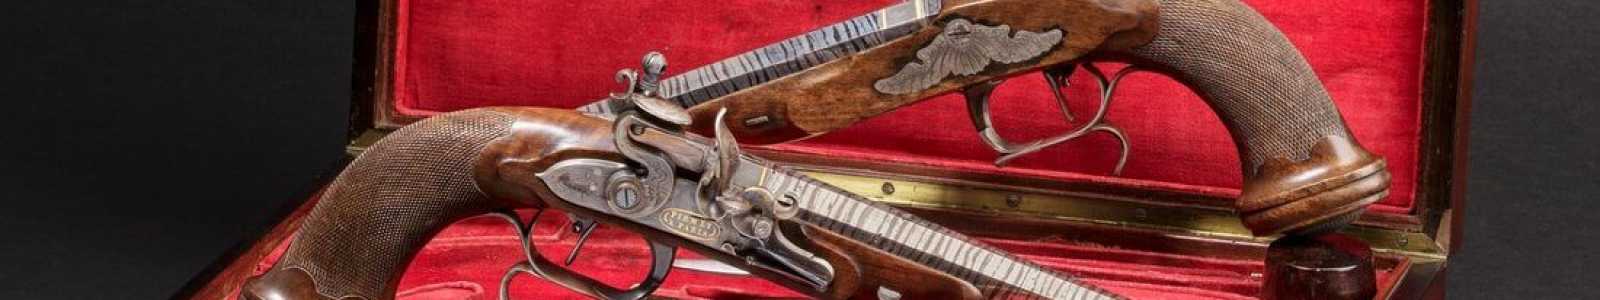 A82s - firearms of five centuries